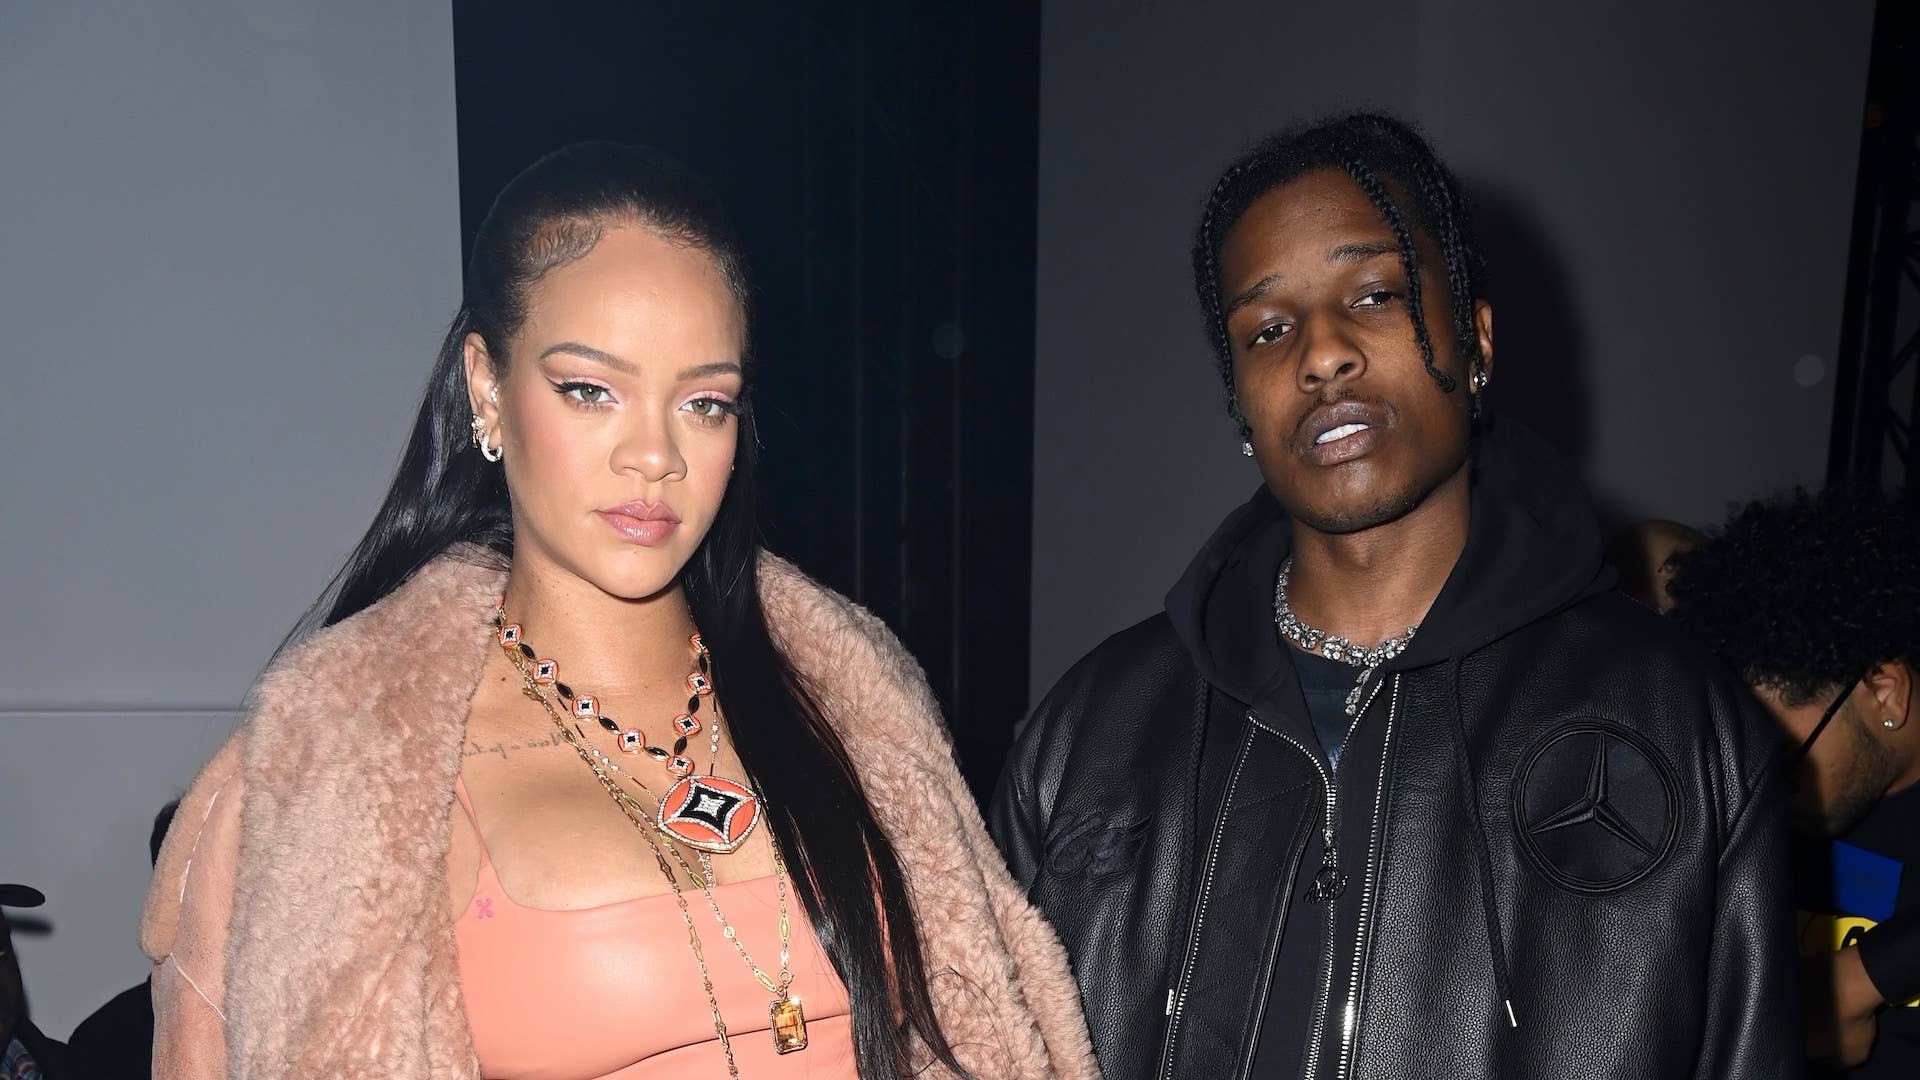 Rihanna Wears All Red While Supporting A$AP Rocky at ComplexCon